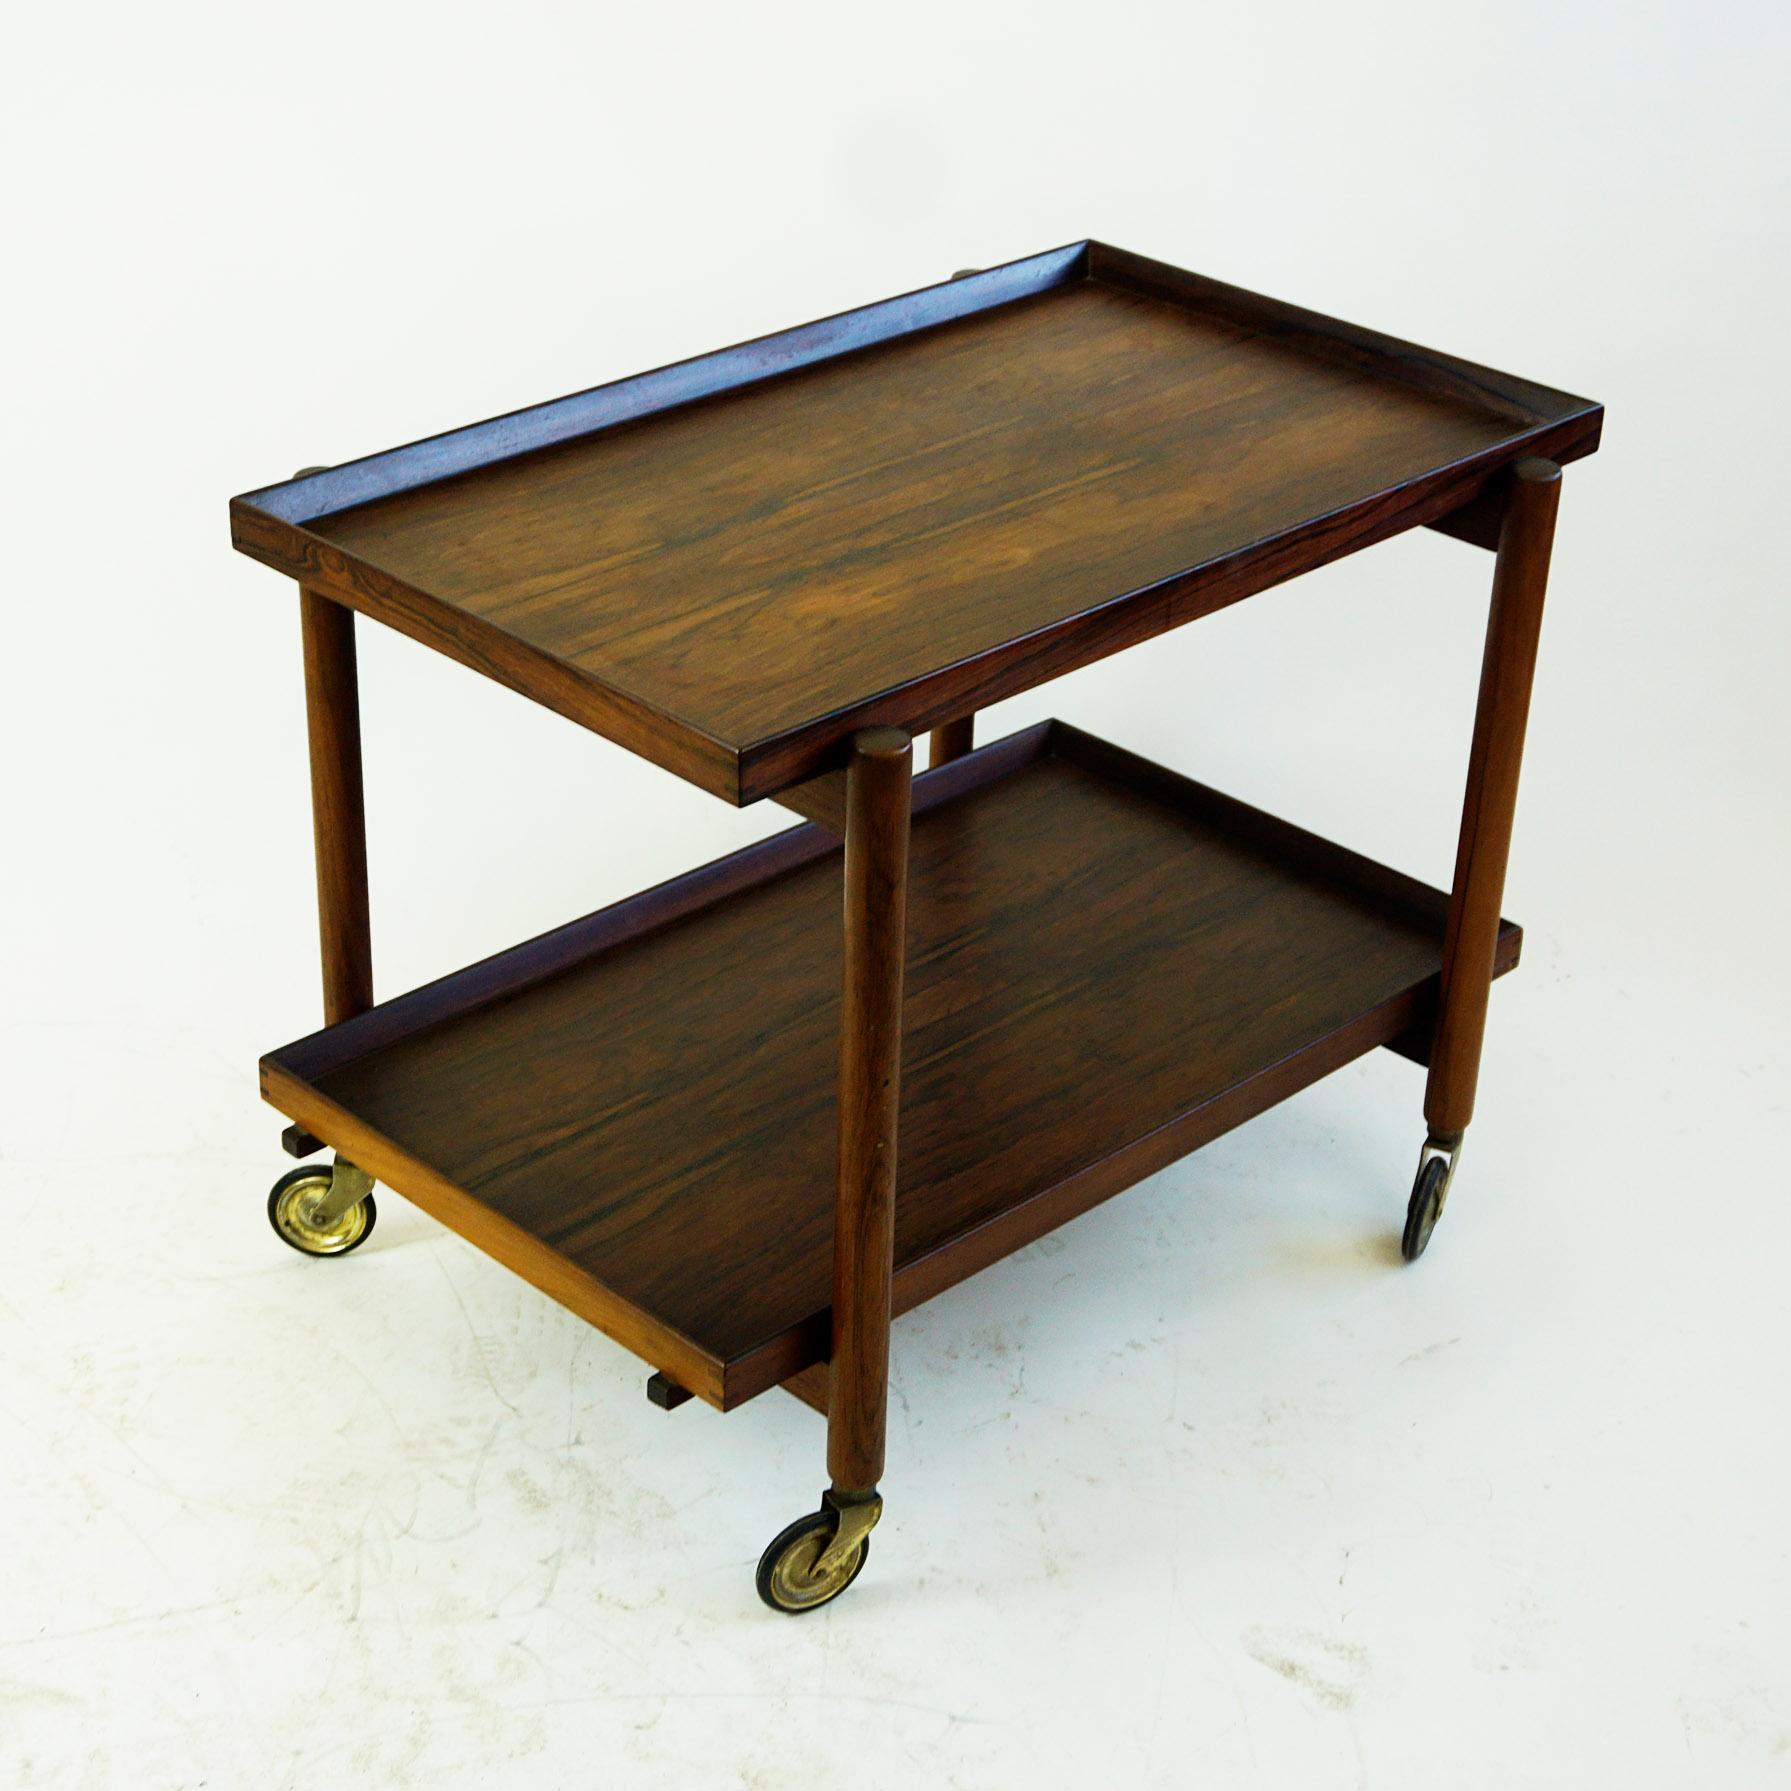 Vintage Scandinavian Modern Poul Hundevad rosewood bar cart from the 1960s. This unique design allows for the bottom tray to be removed and added to the top to expand the serving surface.
Brass and rubber casters. Expands to 60 inches when bottom